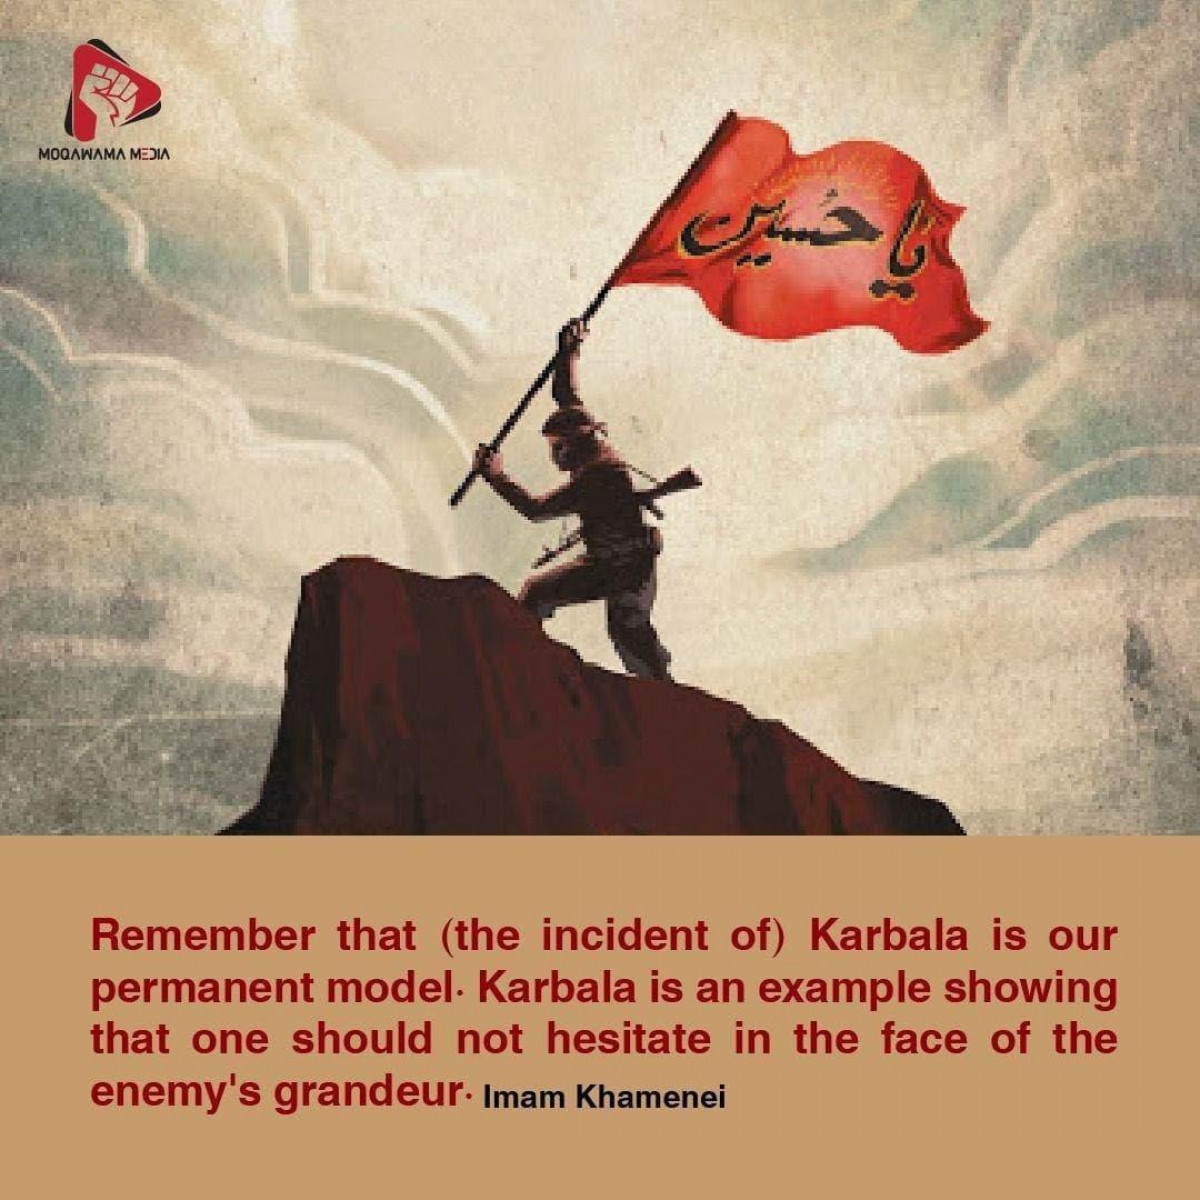 Remember that (the incident of) Karbala is our permanent model